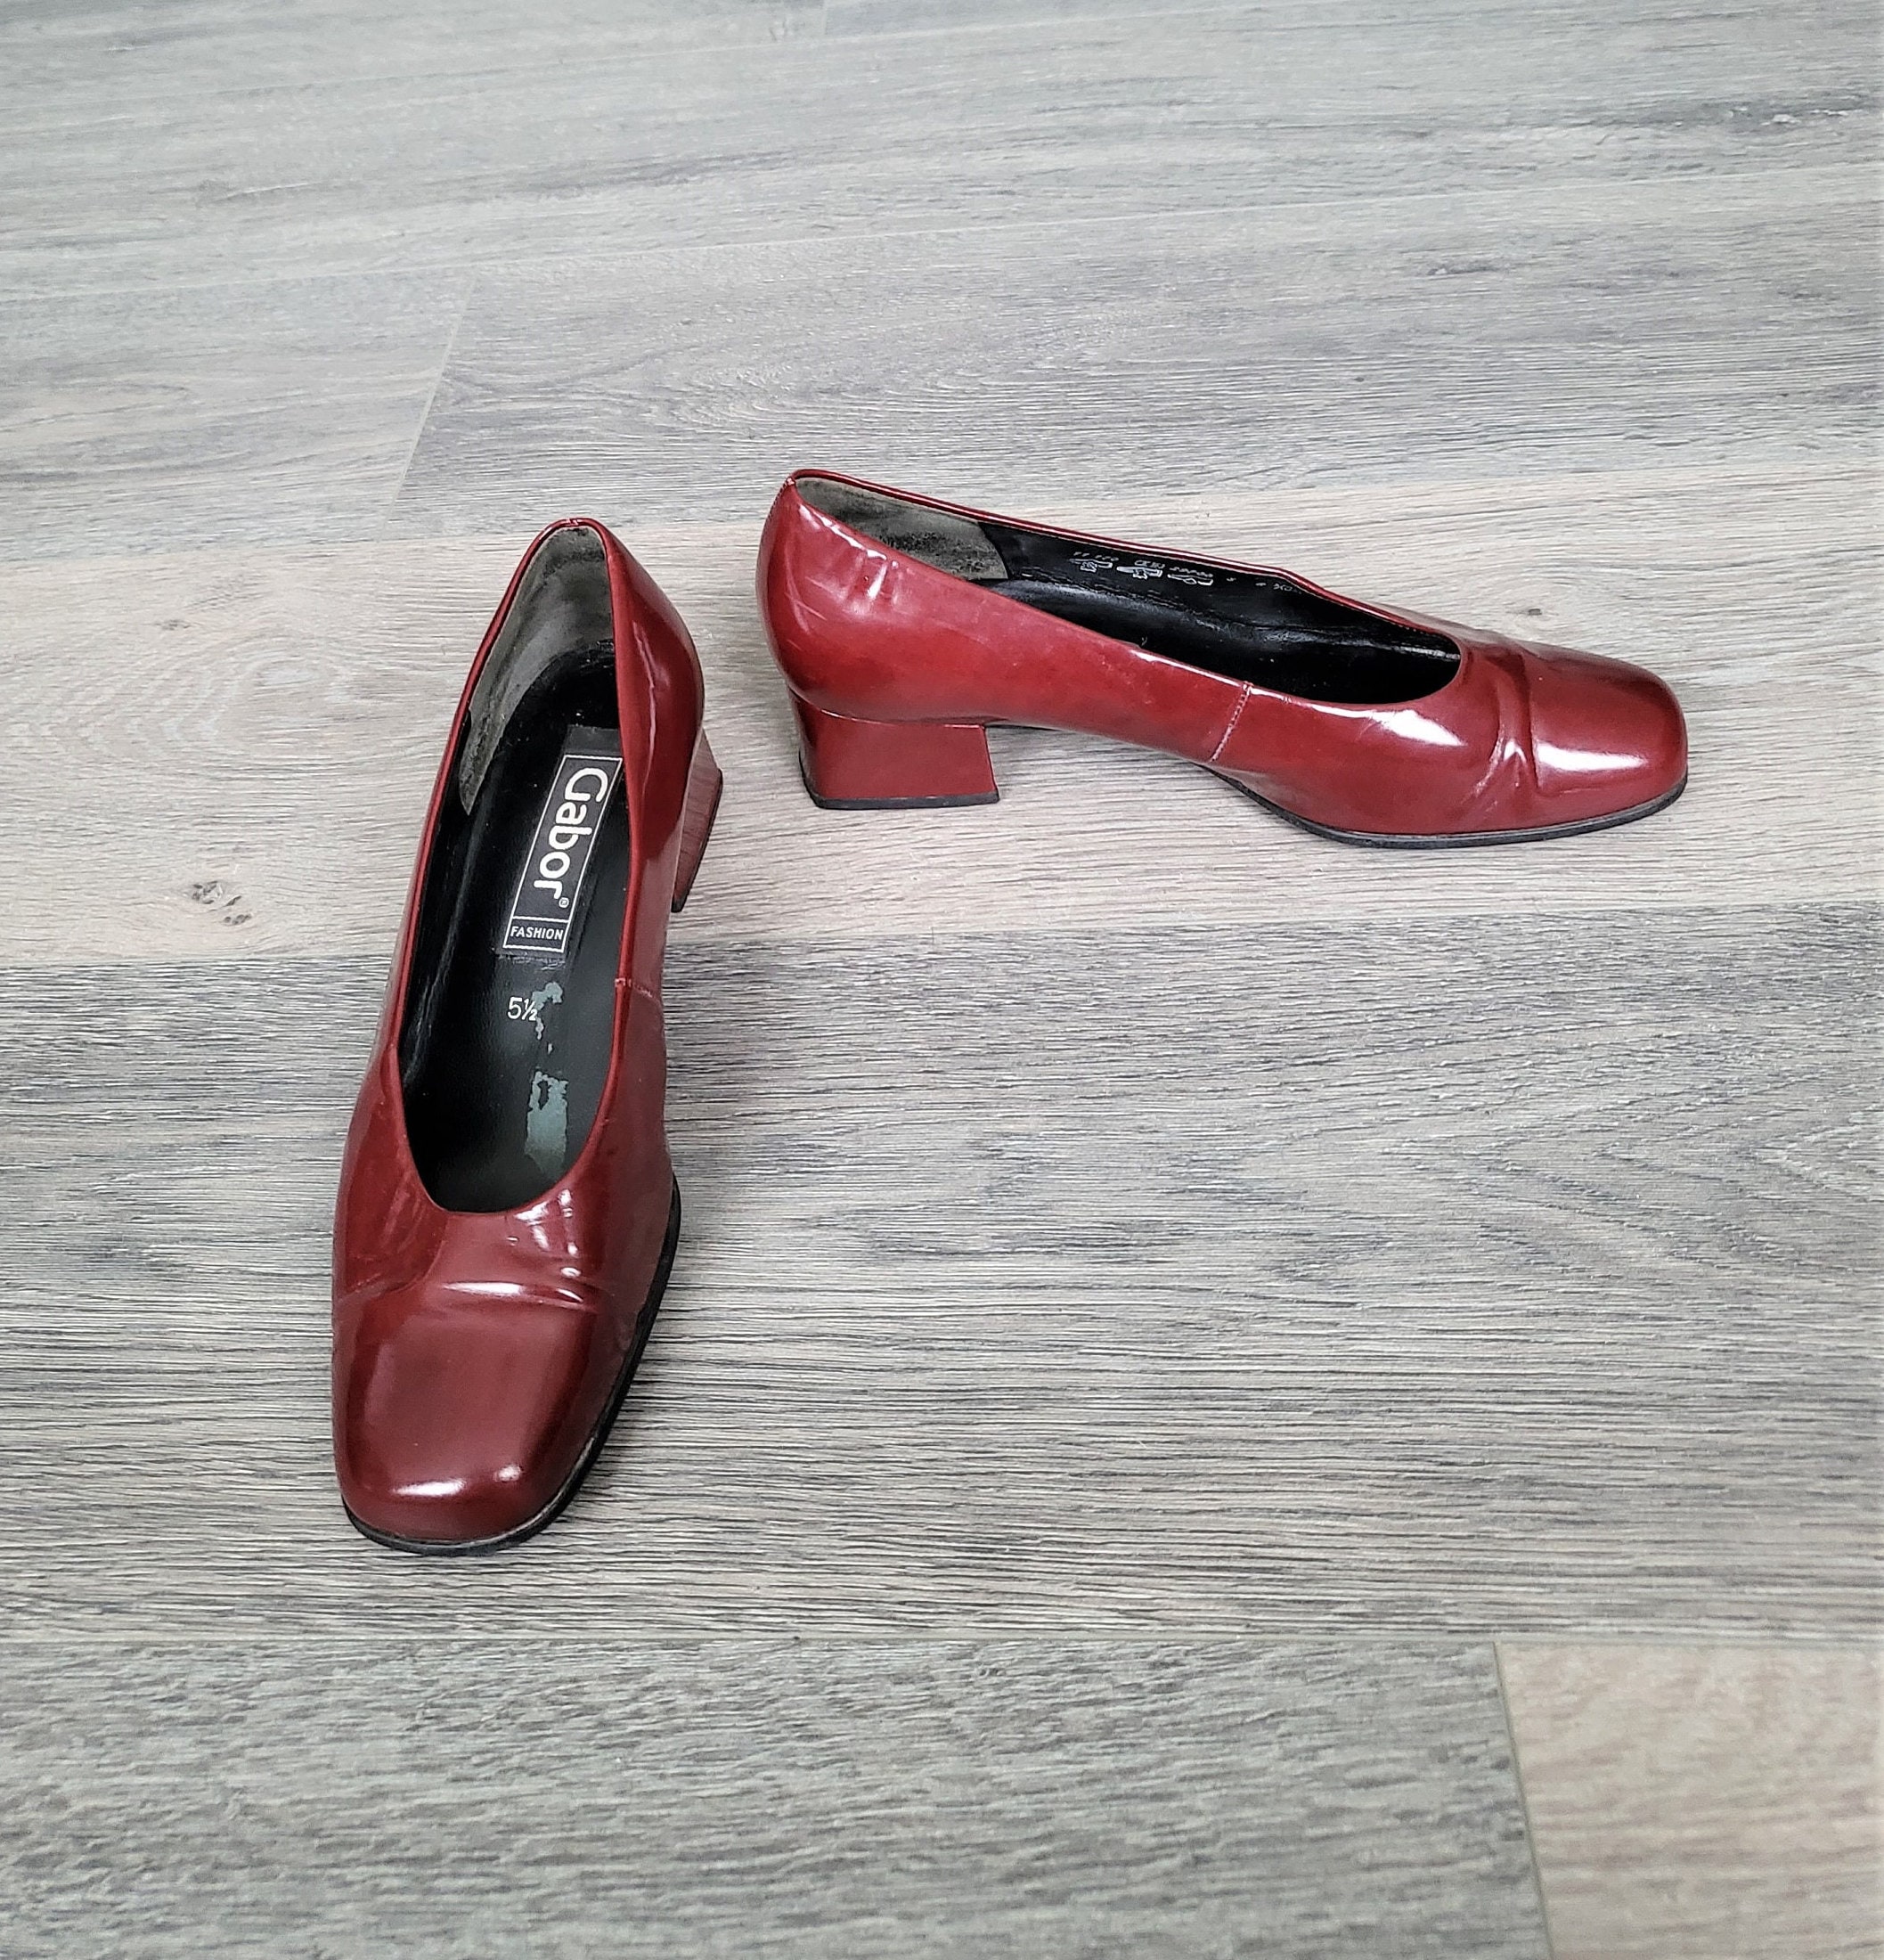 Red Patent Leather Pump EU 35/US 5 / Narrow (A)